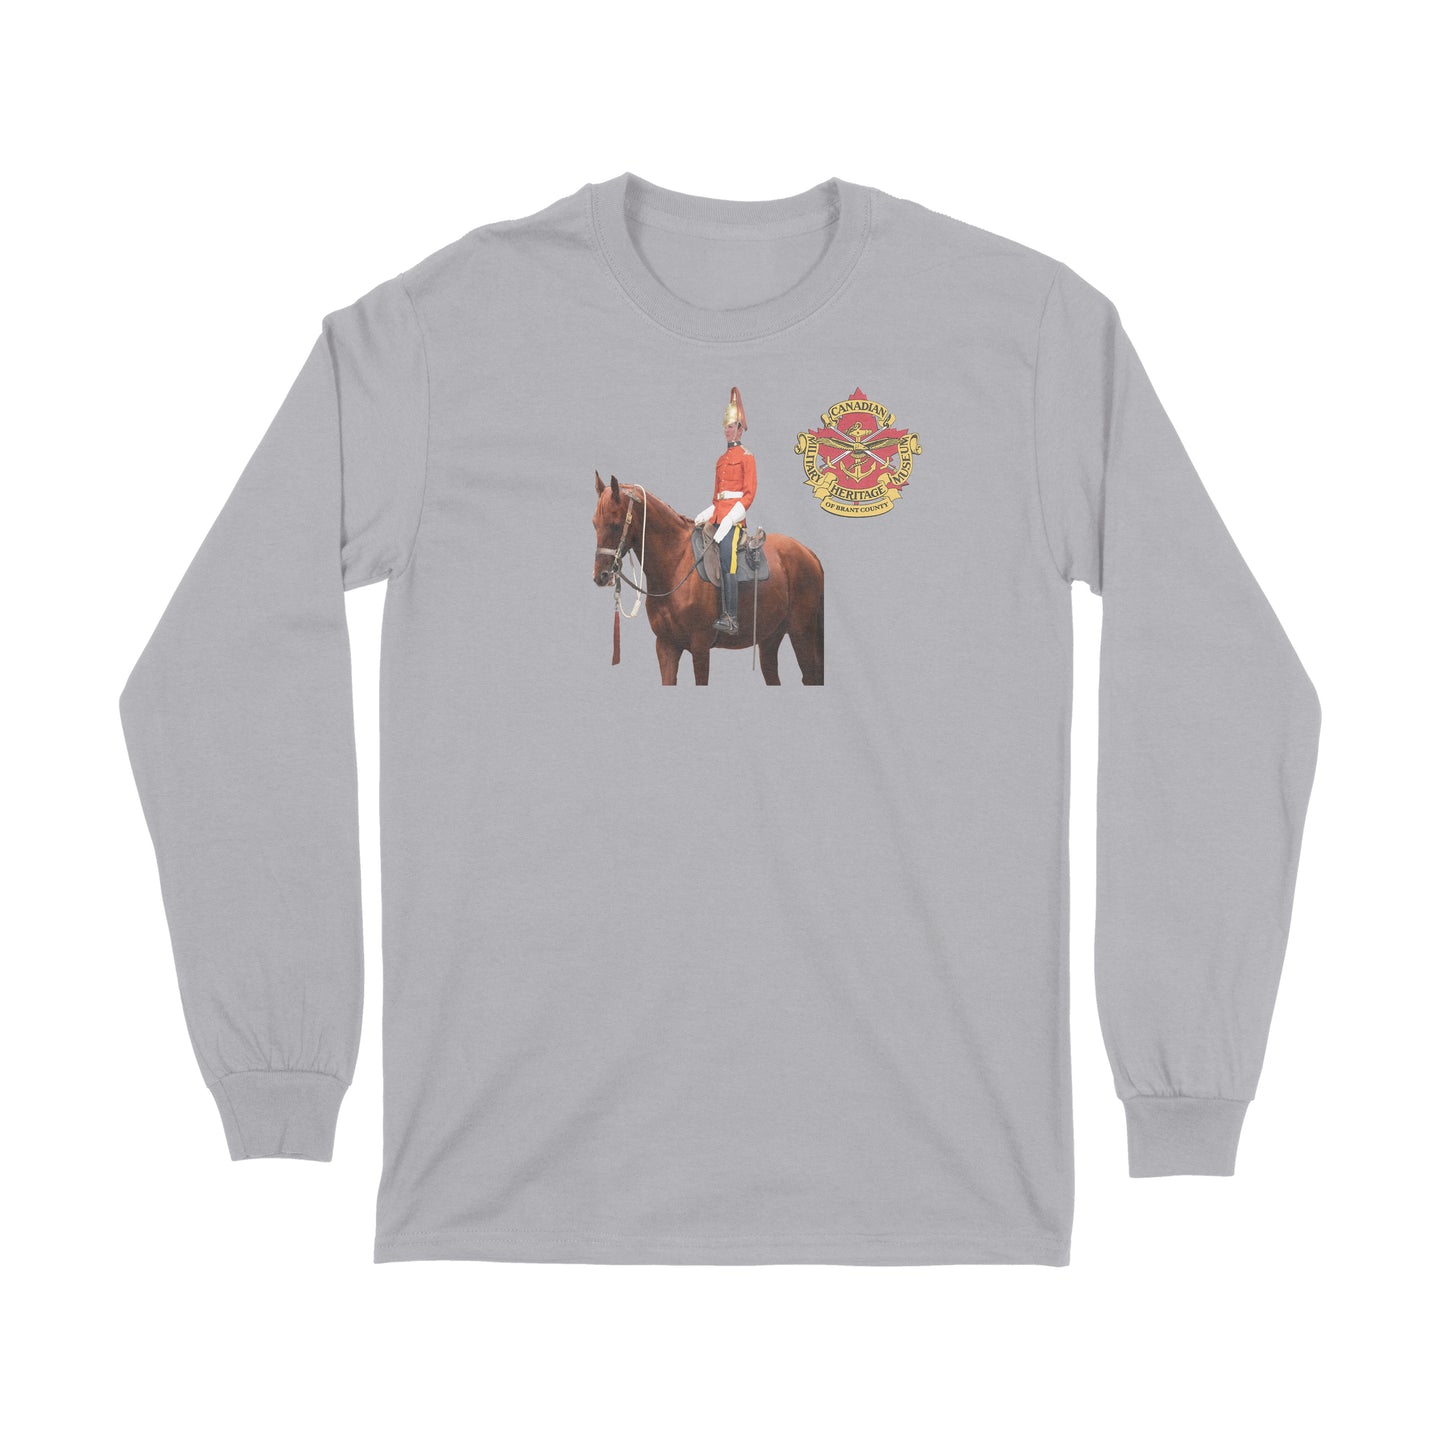 Brantford, Canadian Military Heritage Museum, Fat Dave, Long Sleeve, Mounted Dragoon, Museum, Grey